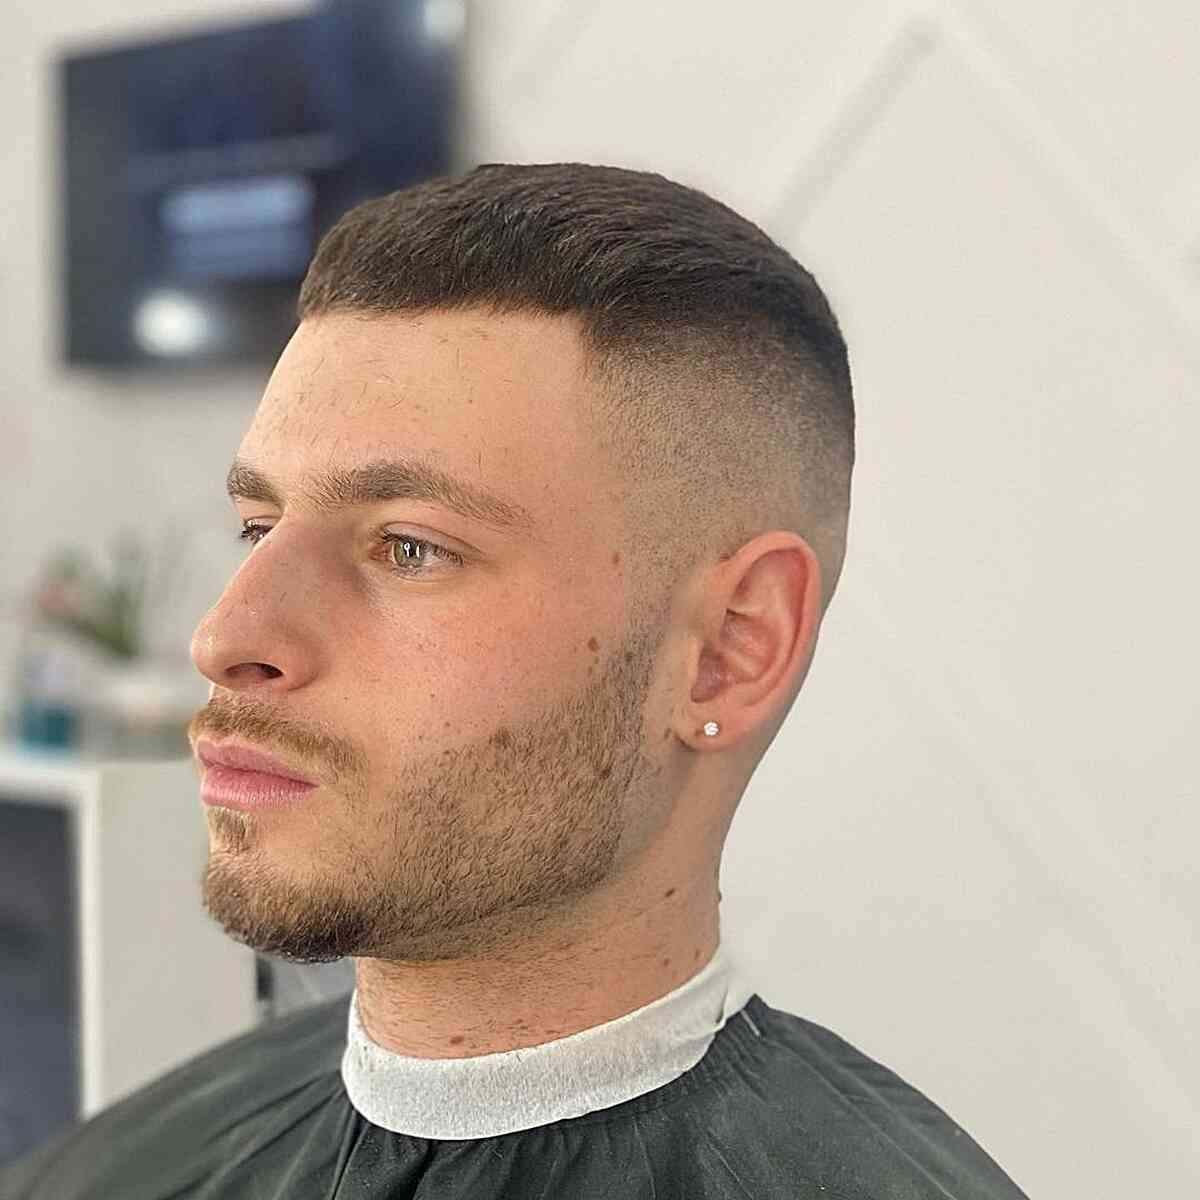 The Skin Fade Short Crop for Guys